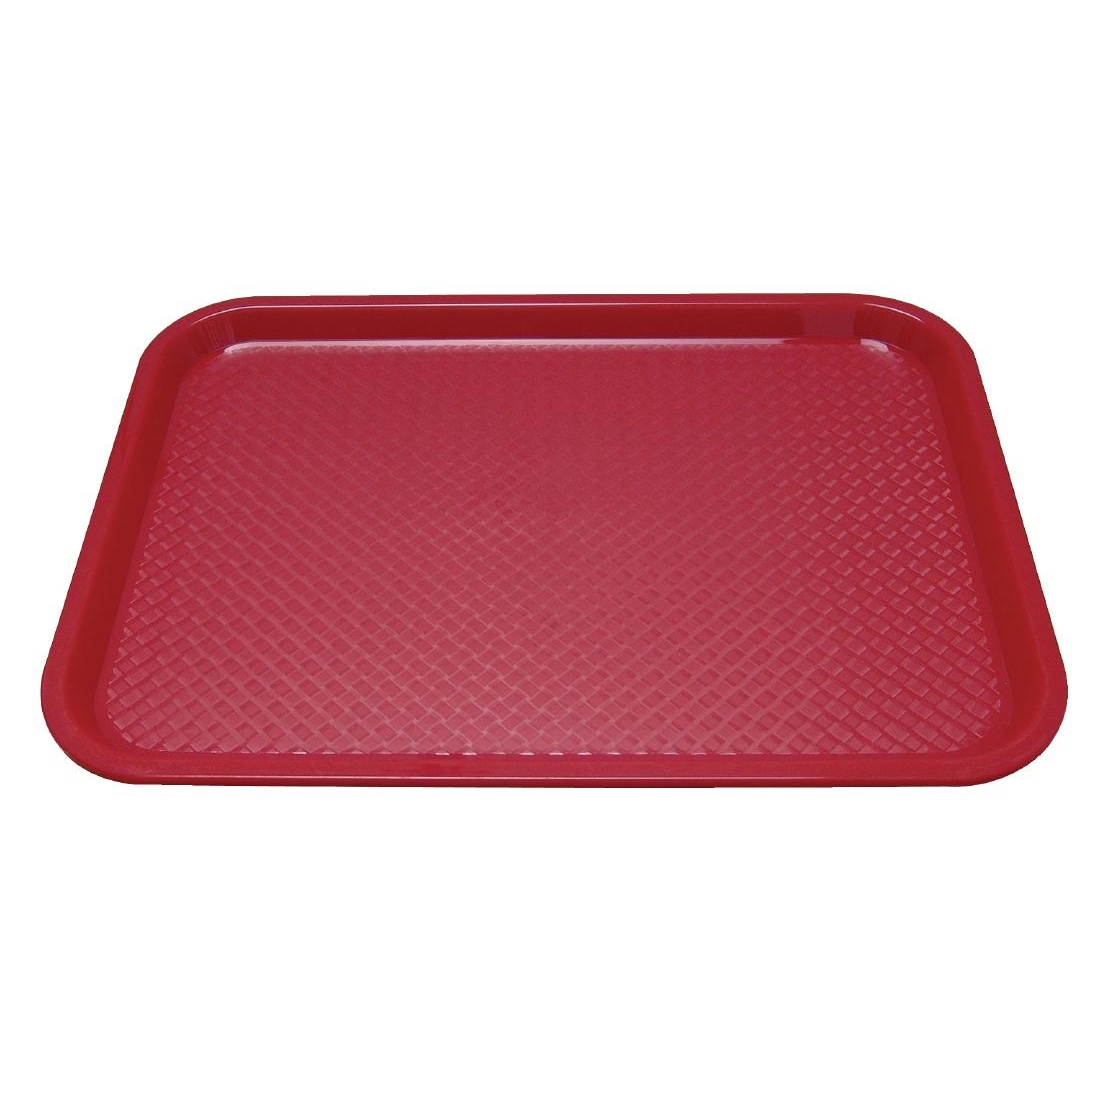 Kristallon Plastic Fast Food Tray Red Large